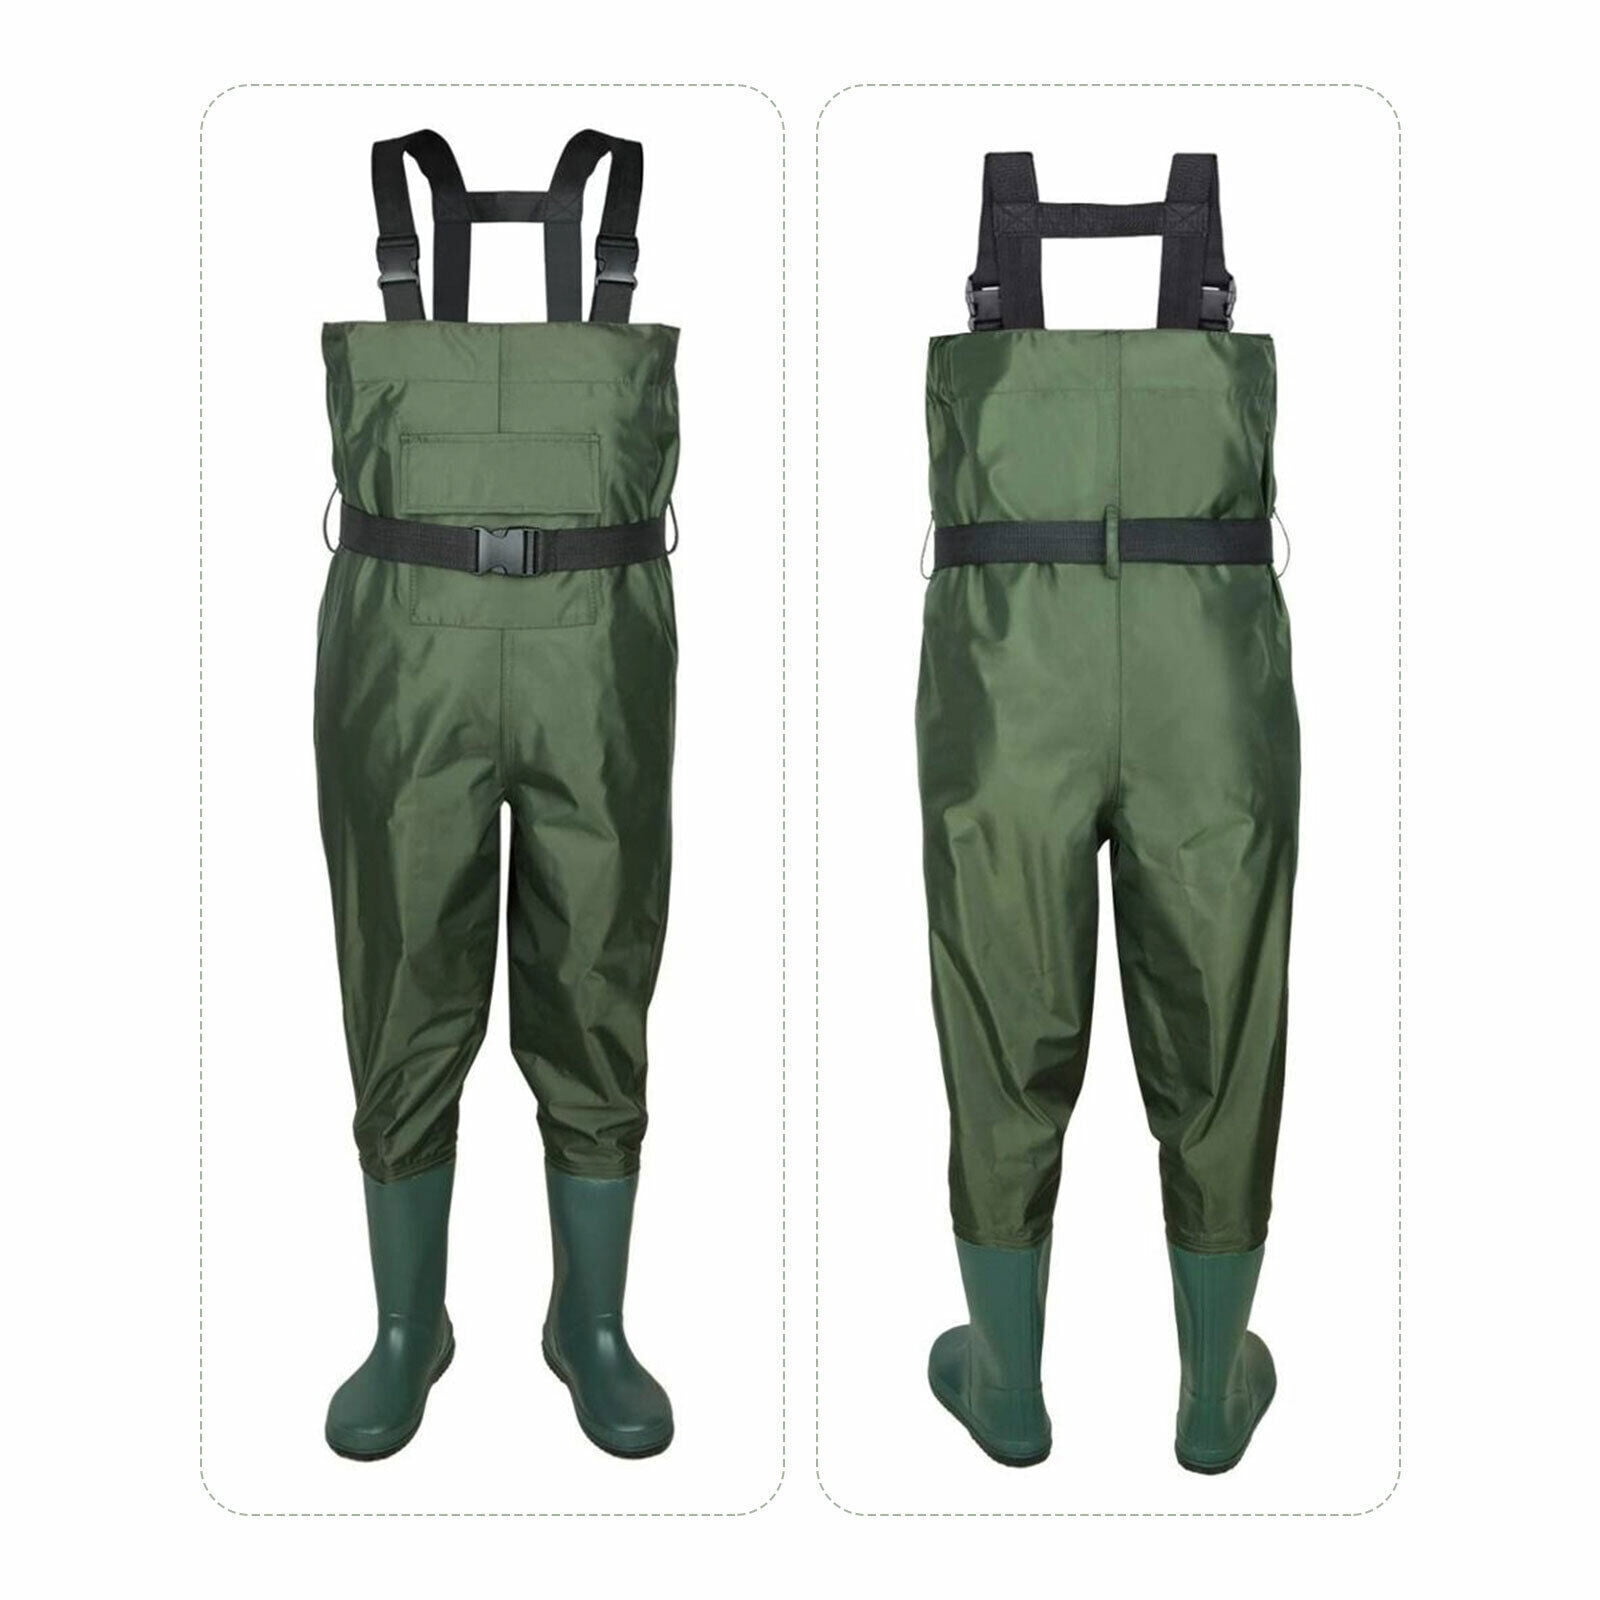 WSYW Waterproof Chest Waders Nylon 2-Ply Rubber Bootfoot for